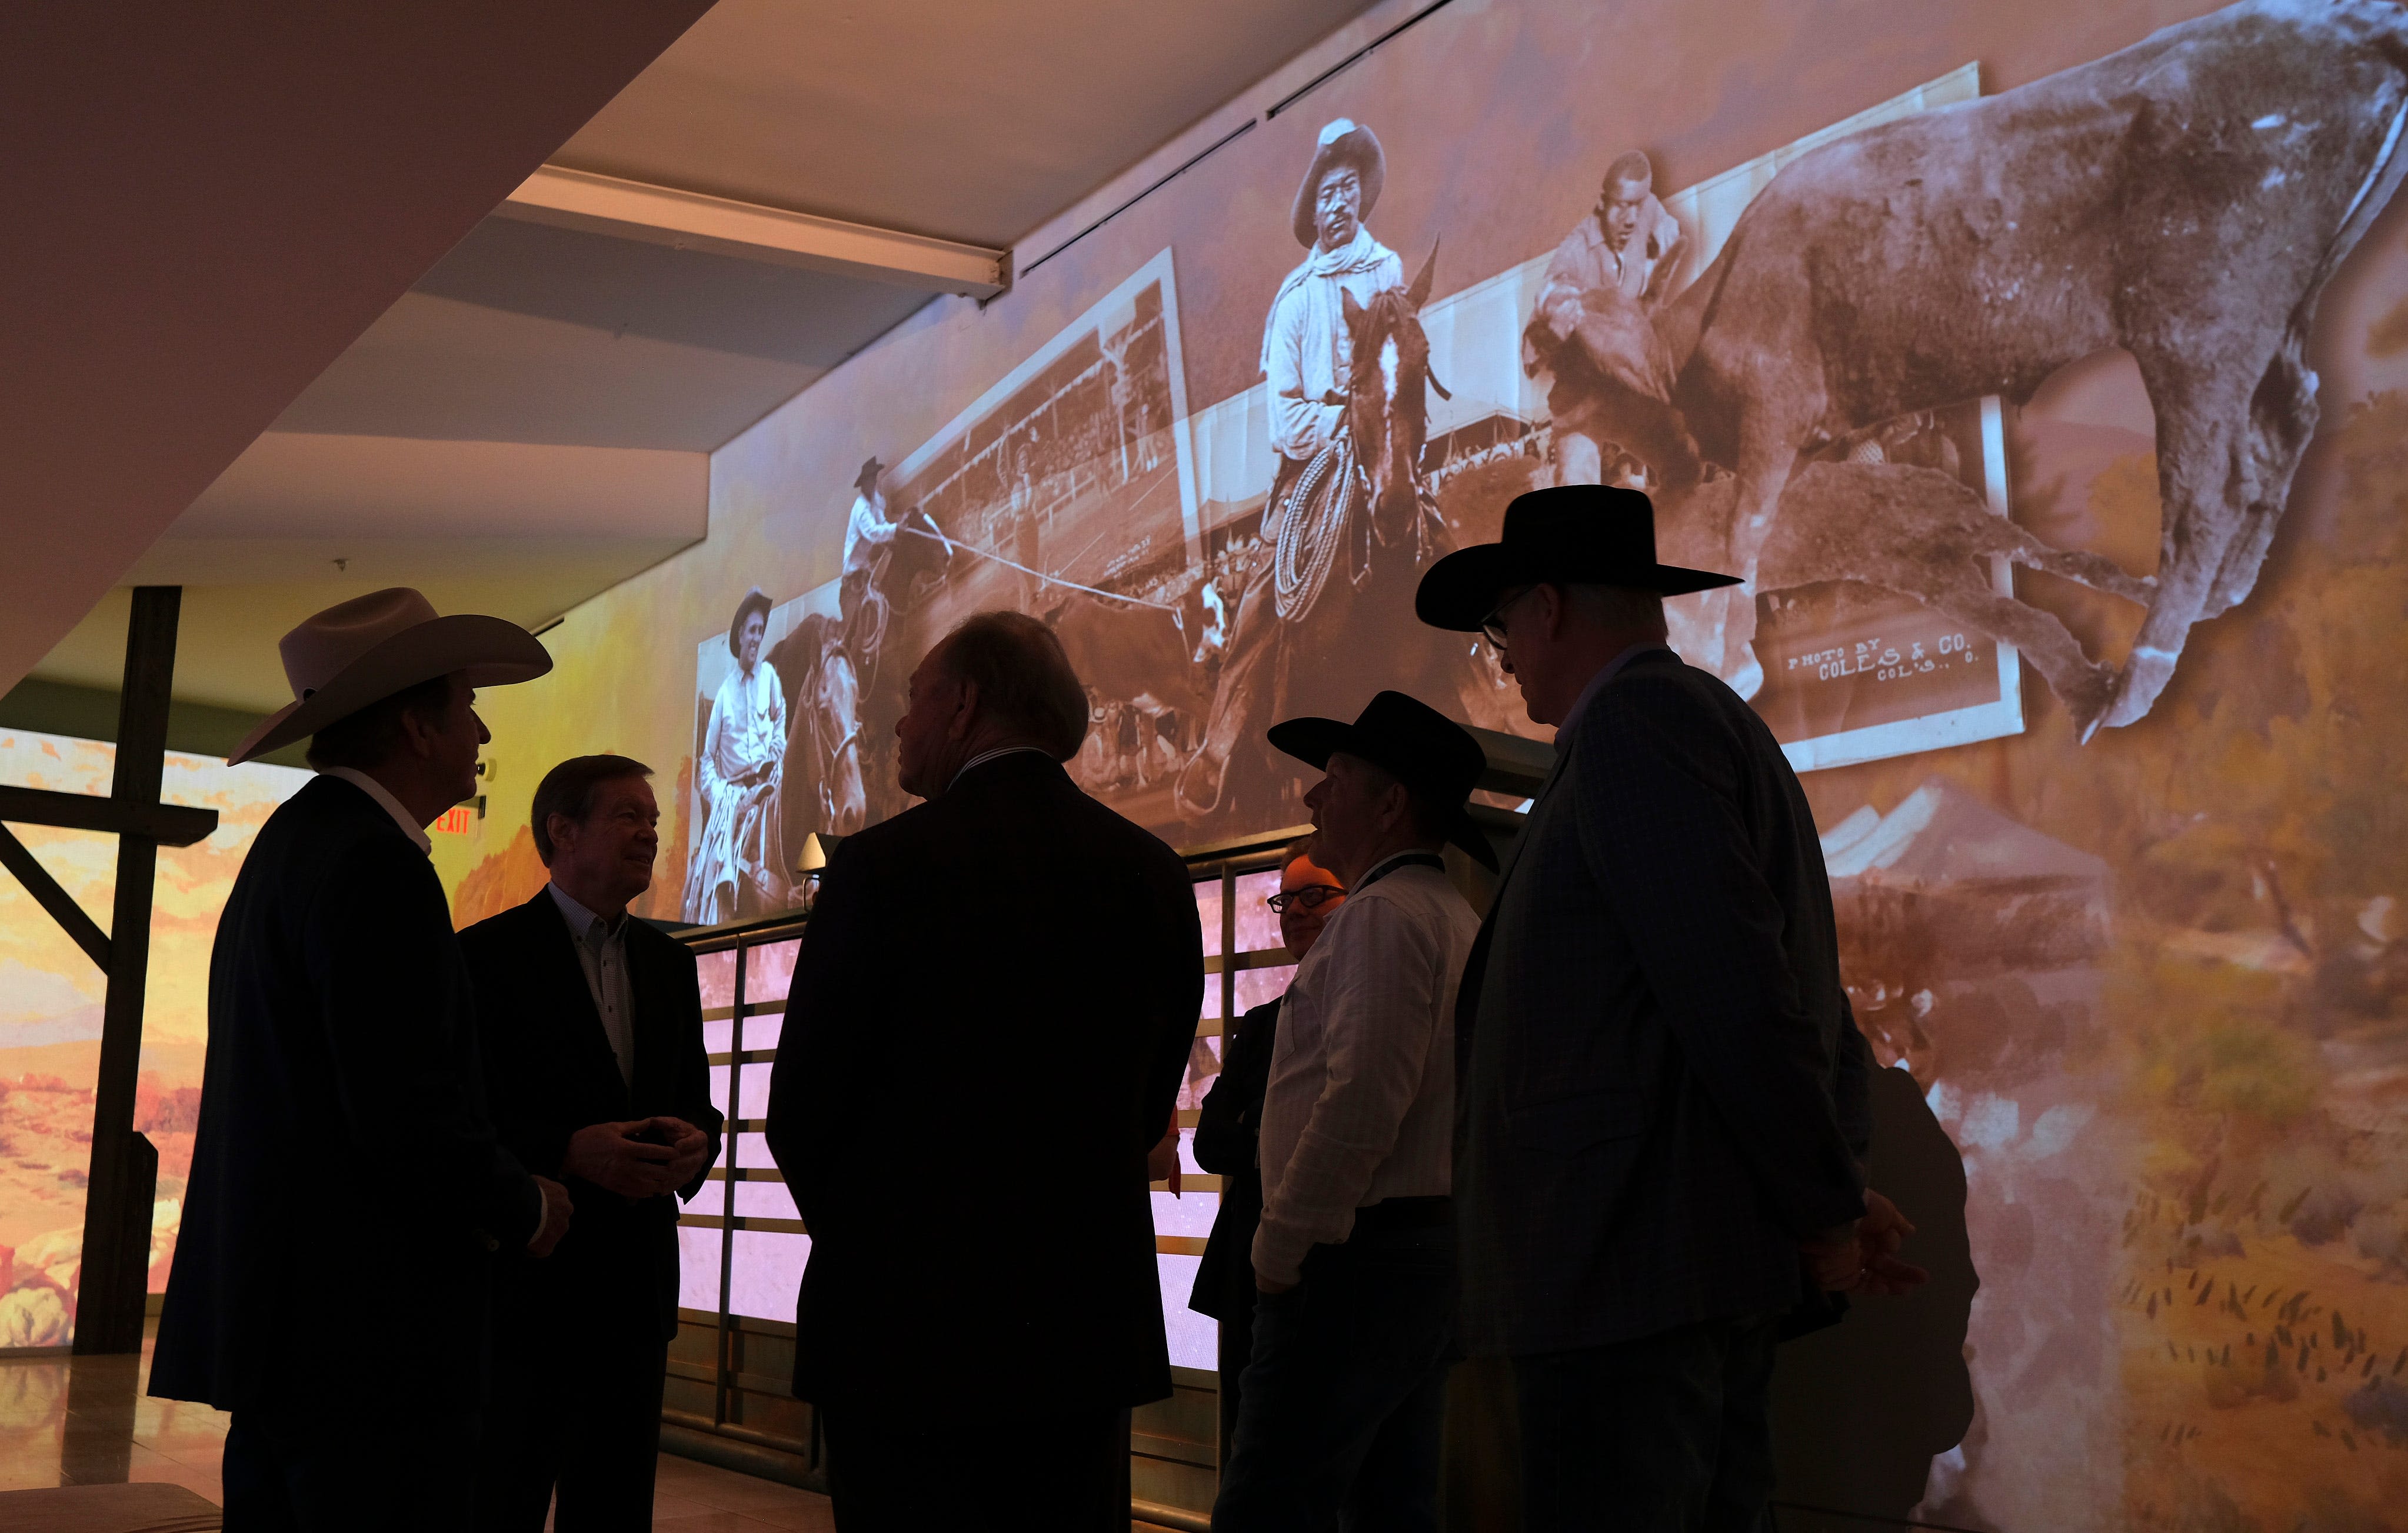 New exhibit uses futuristic technology to give Cowboy museum visitors a feel for the past